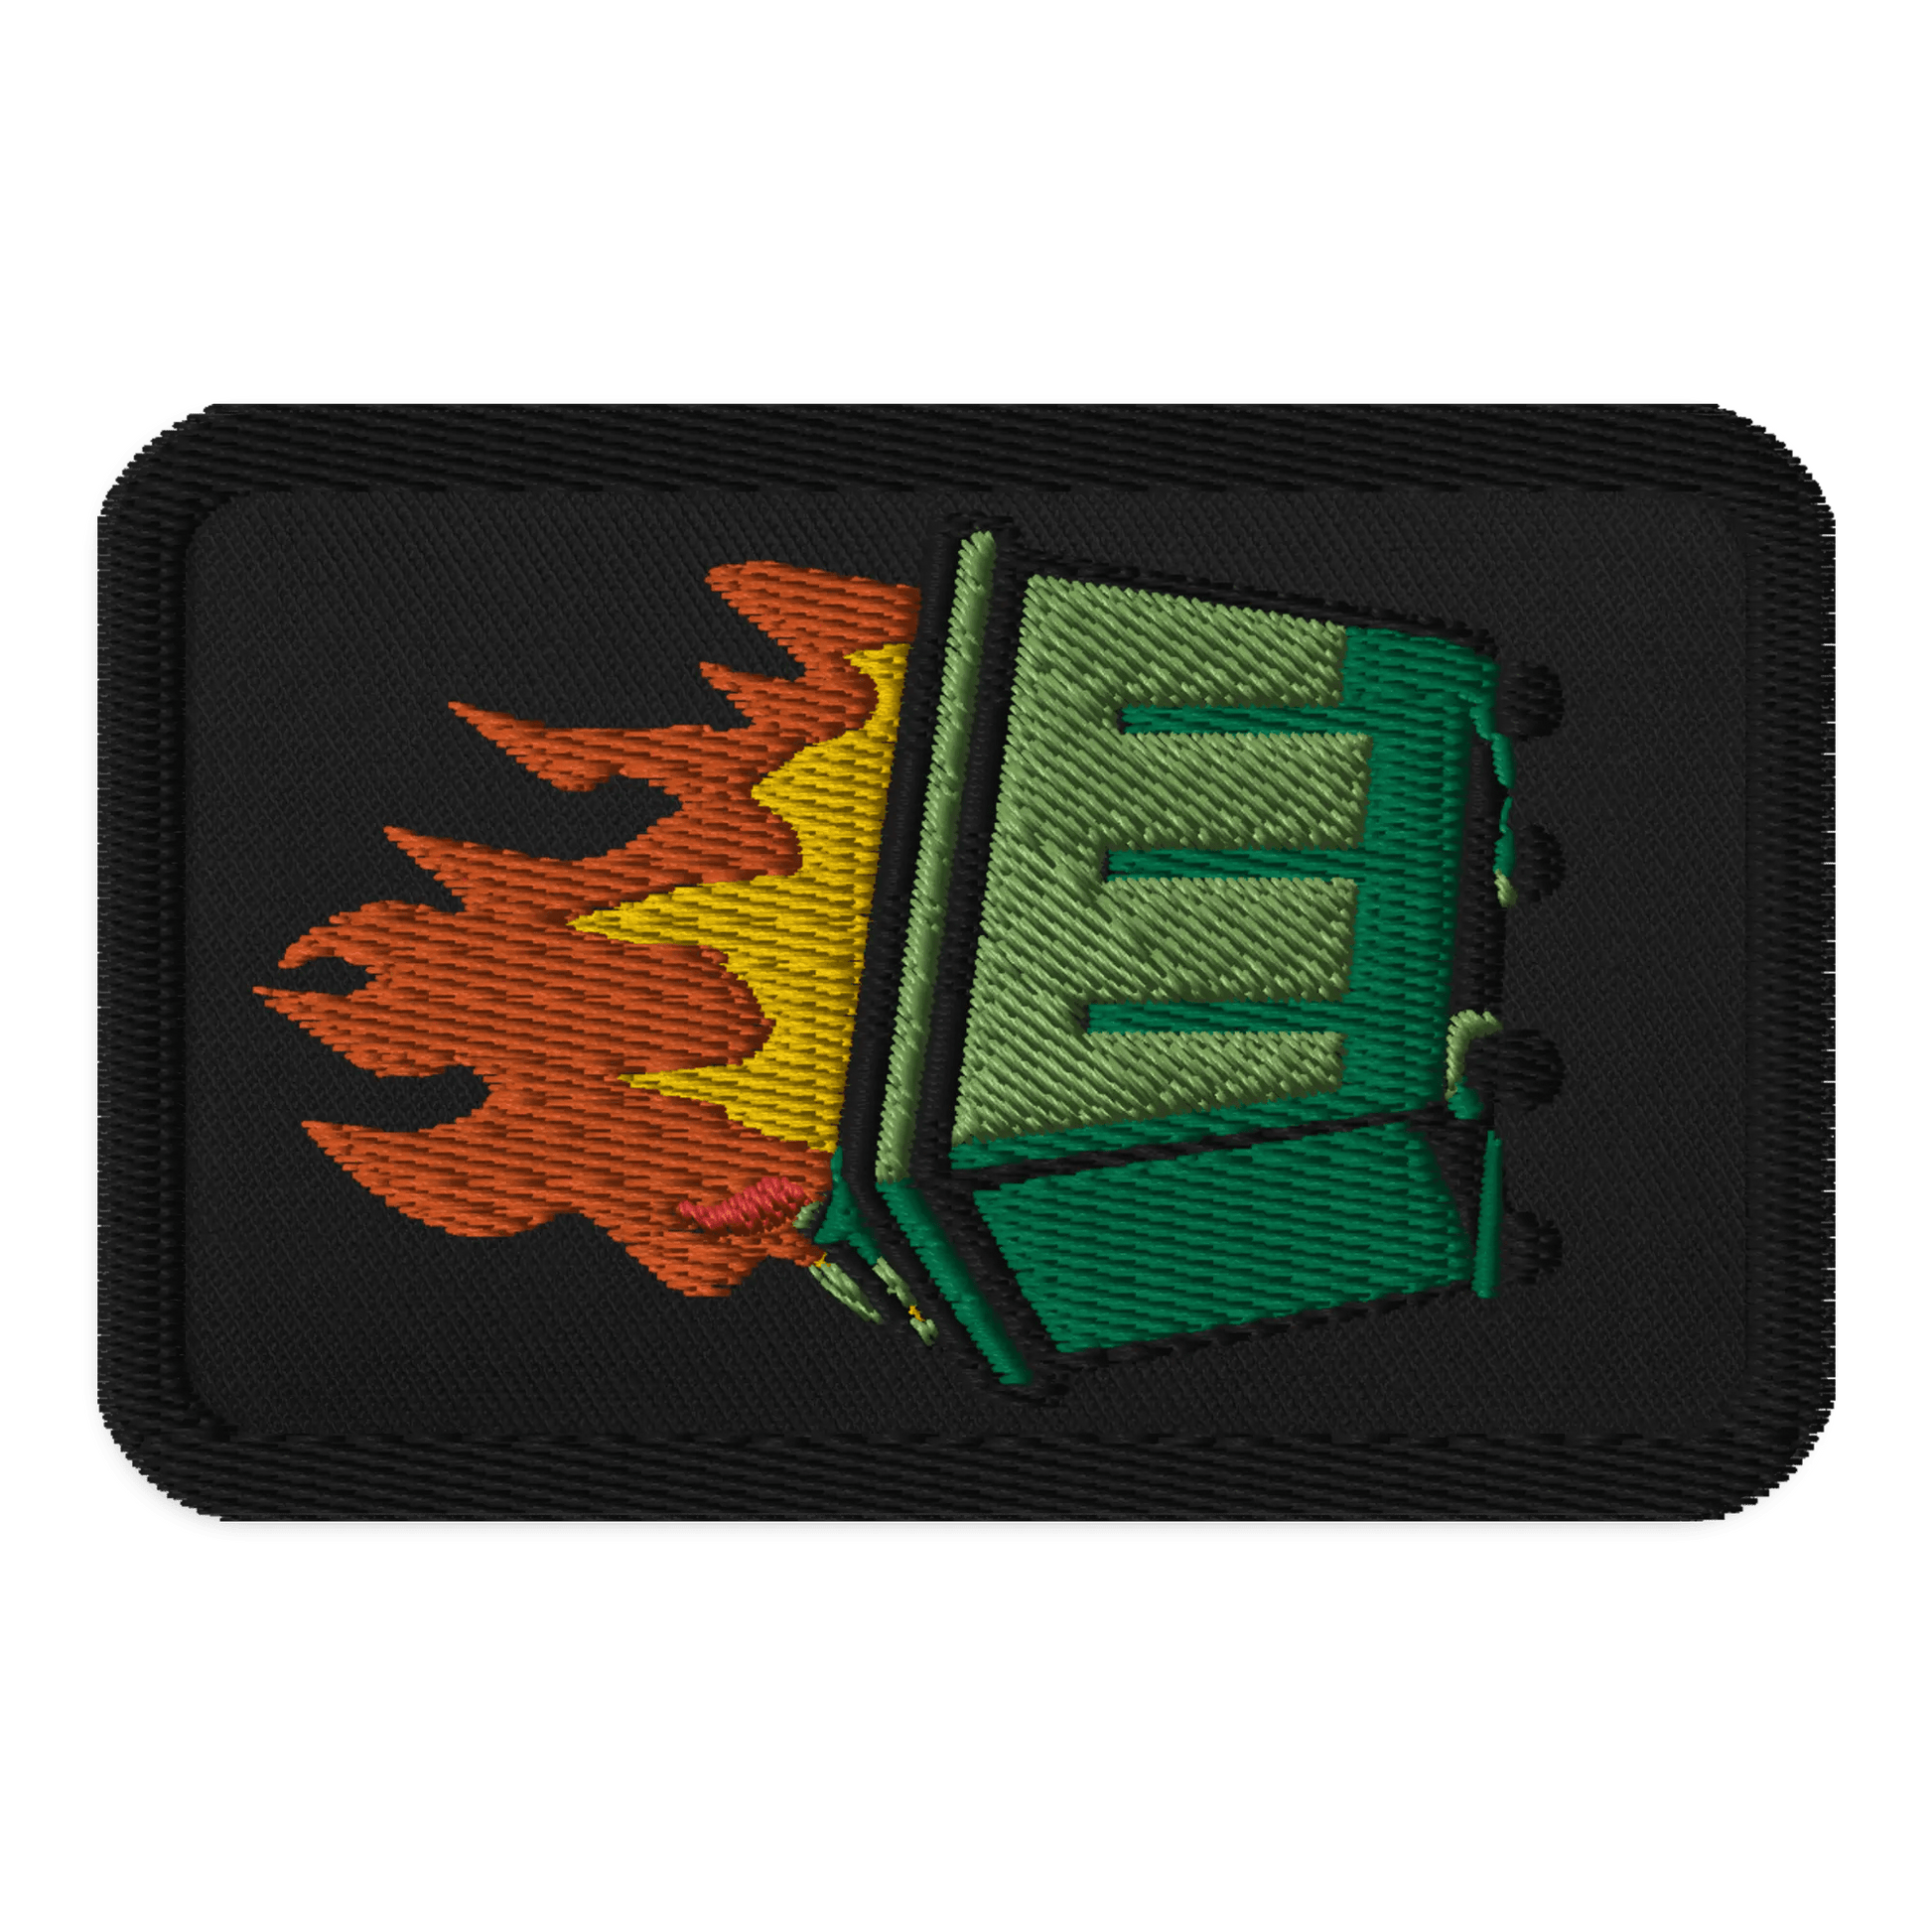 Artsy Patches: Dumpster Fire - Red Pawn Shop